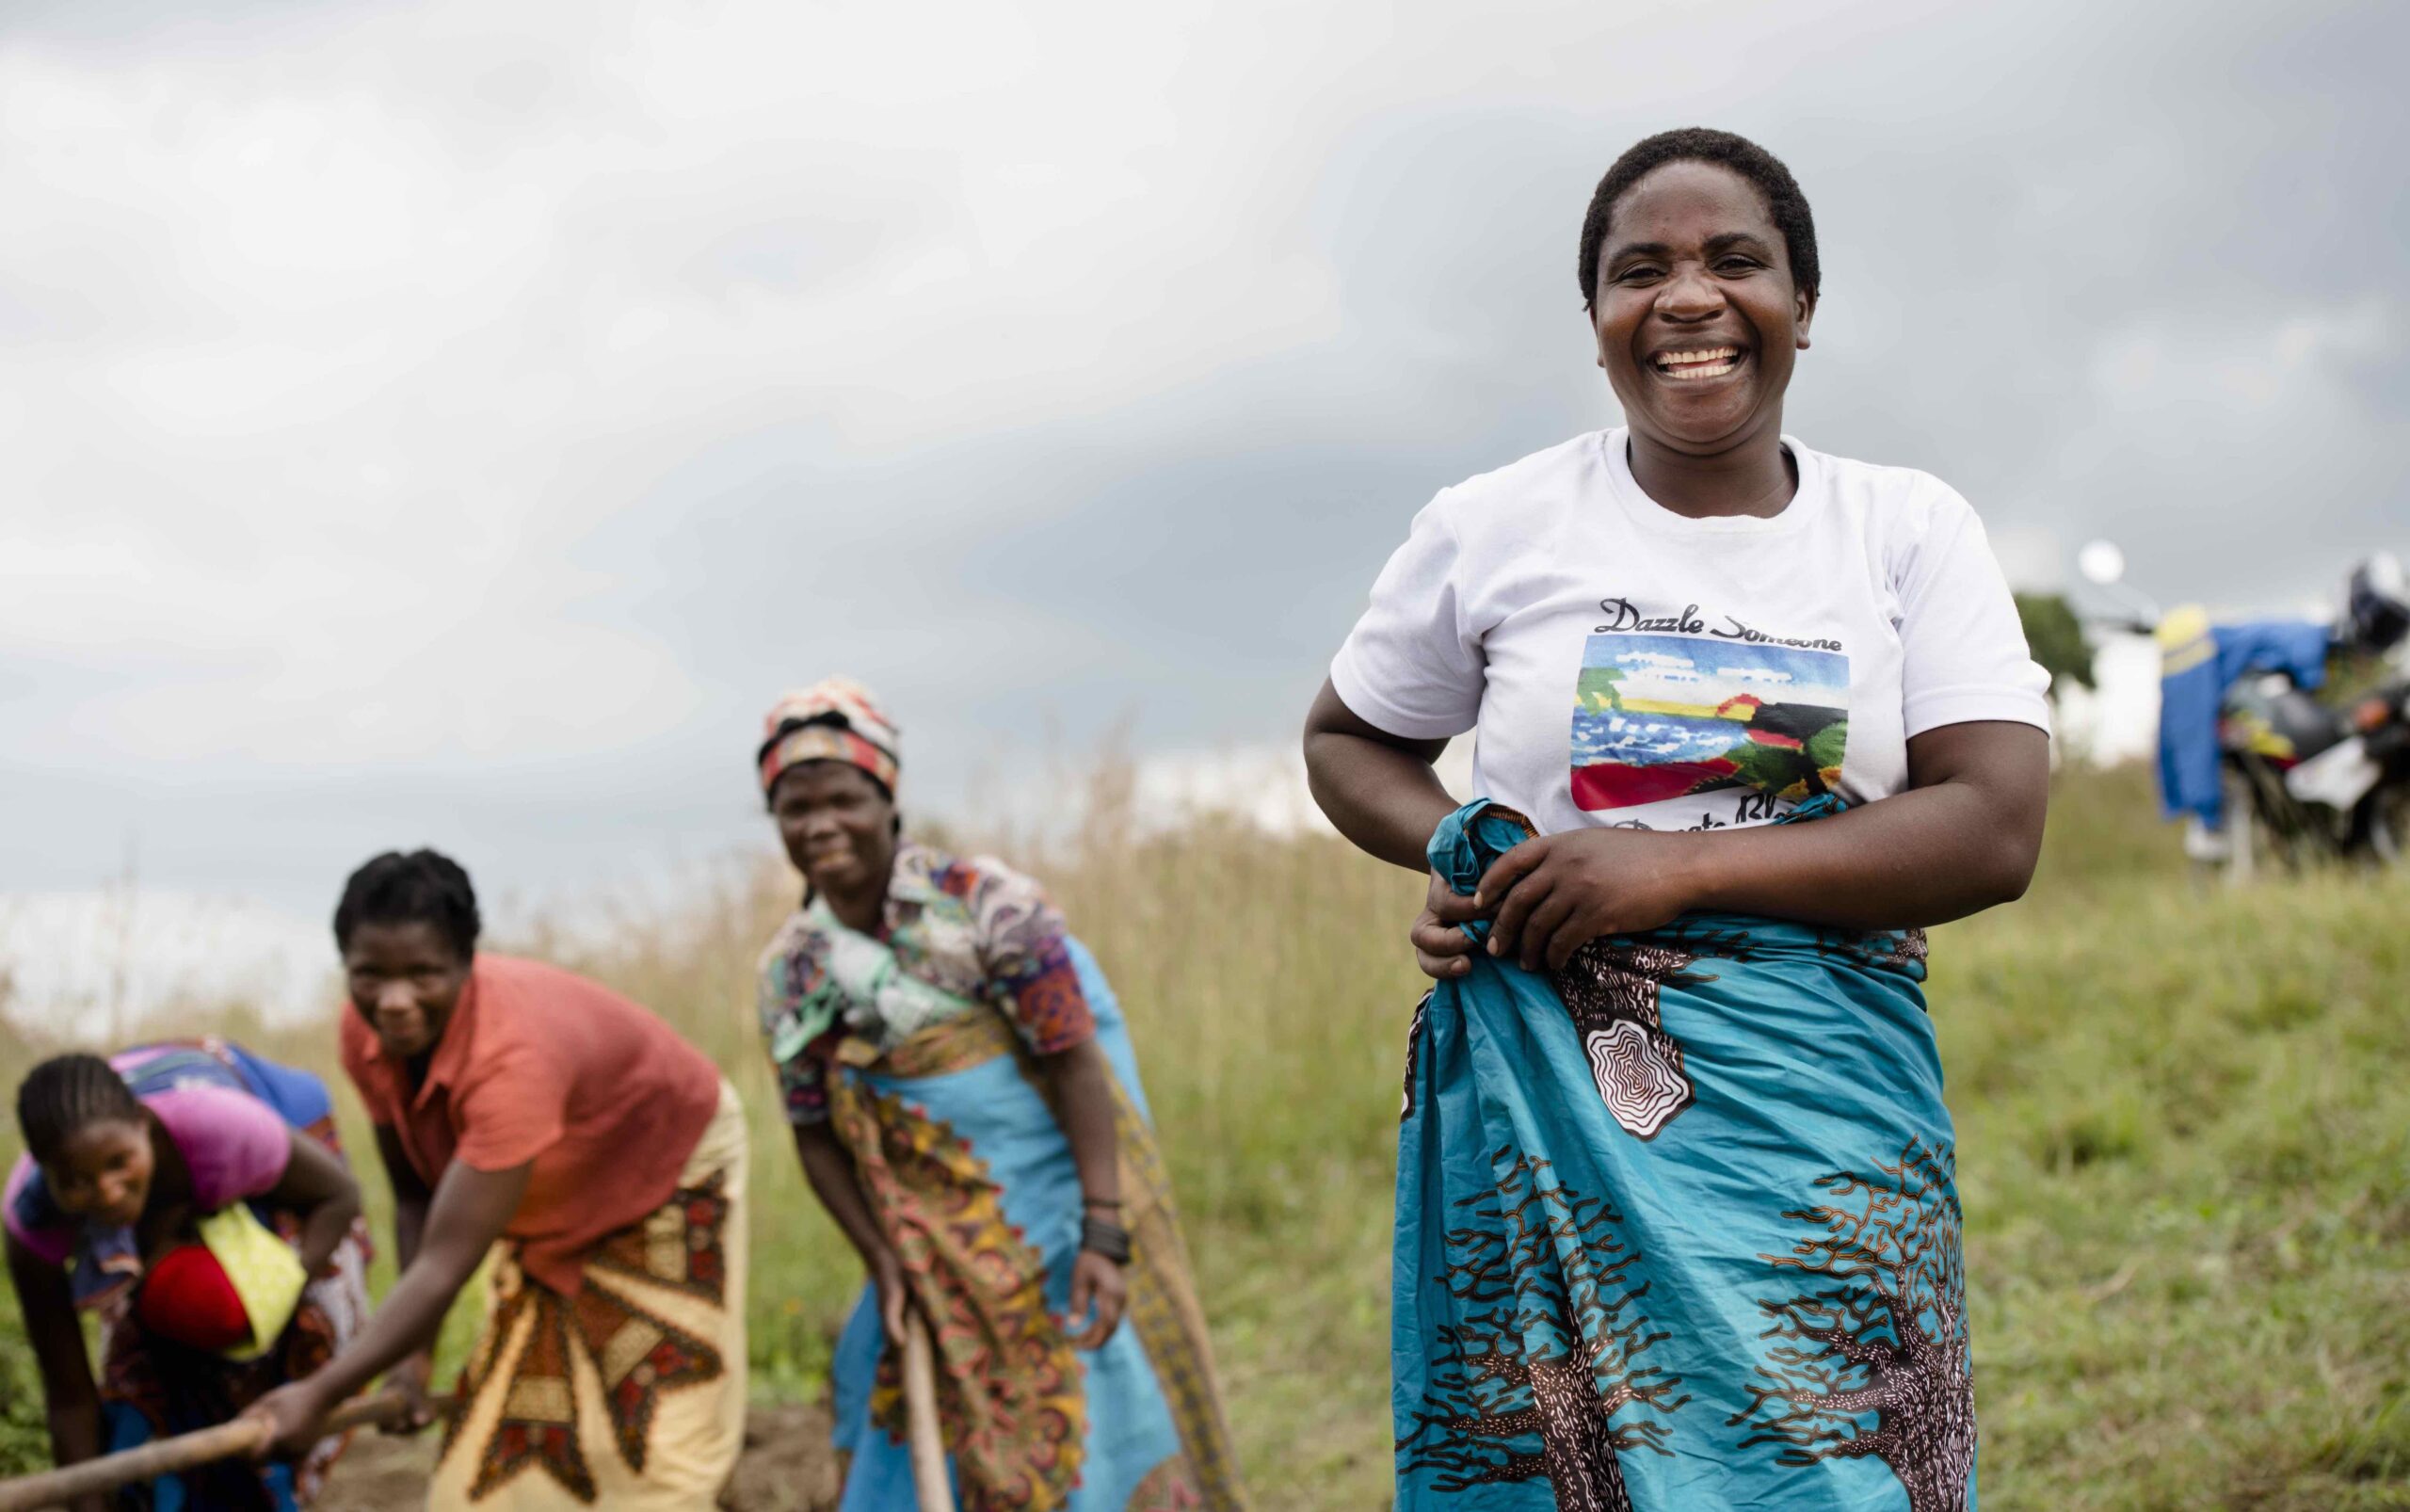 To improve Africa’s soil health and plant nutrition, empower women farmers